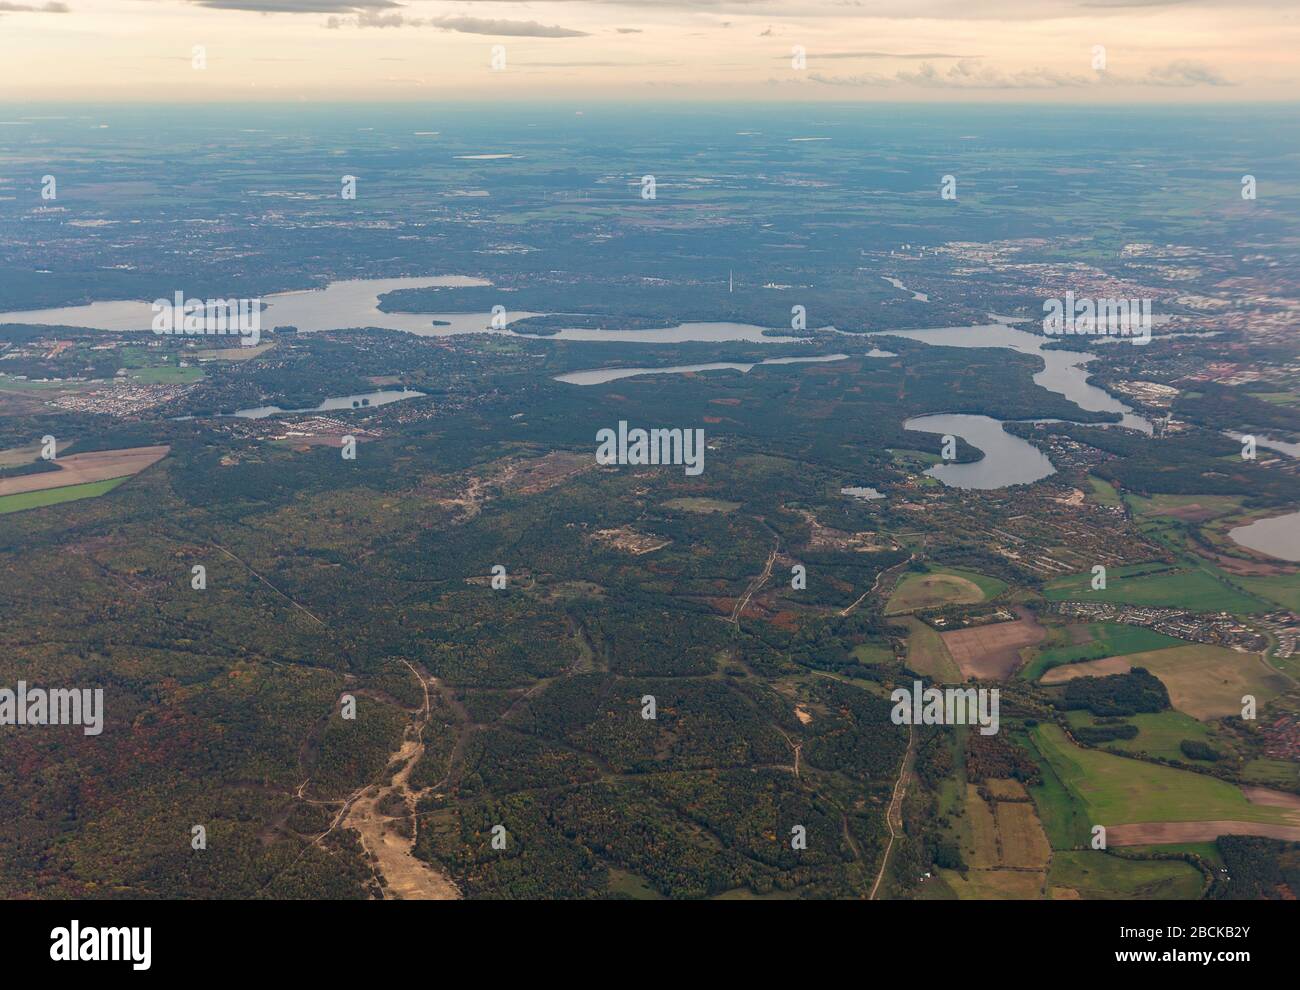 Aerial landscape view over Potsdam, Havel river, Krampnitz, Jungfern and Sacrower Lakes in Germany. Stock Photo